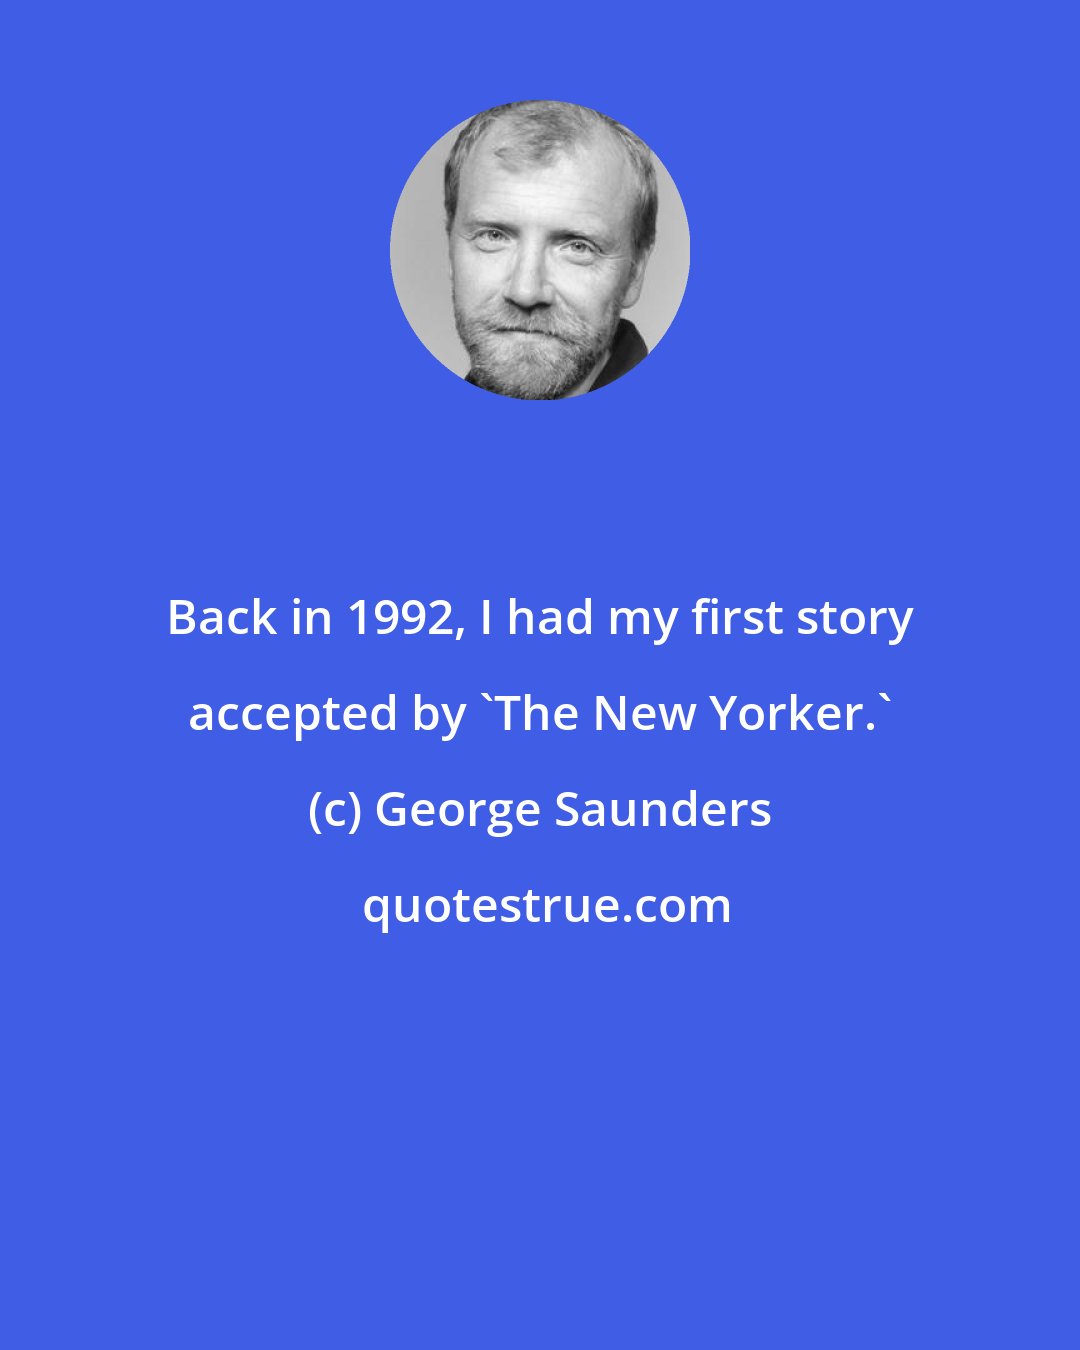 George Saunders: Back in 1992, I had my first story accepted by 'The New Yorker.'